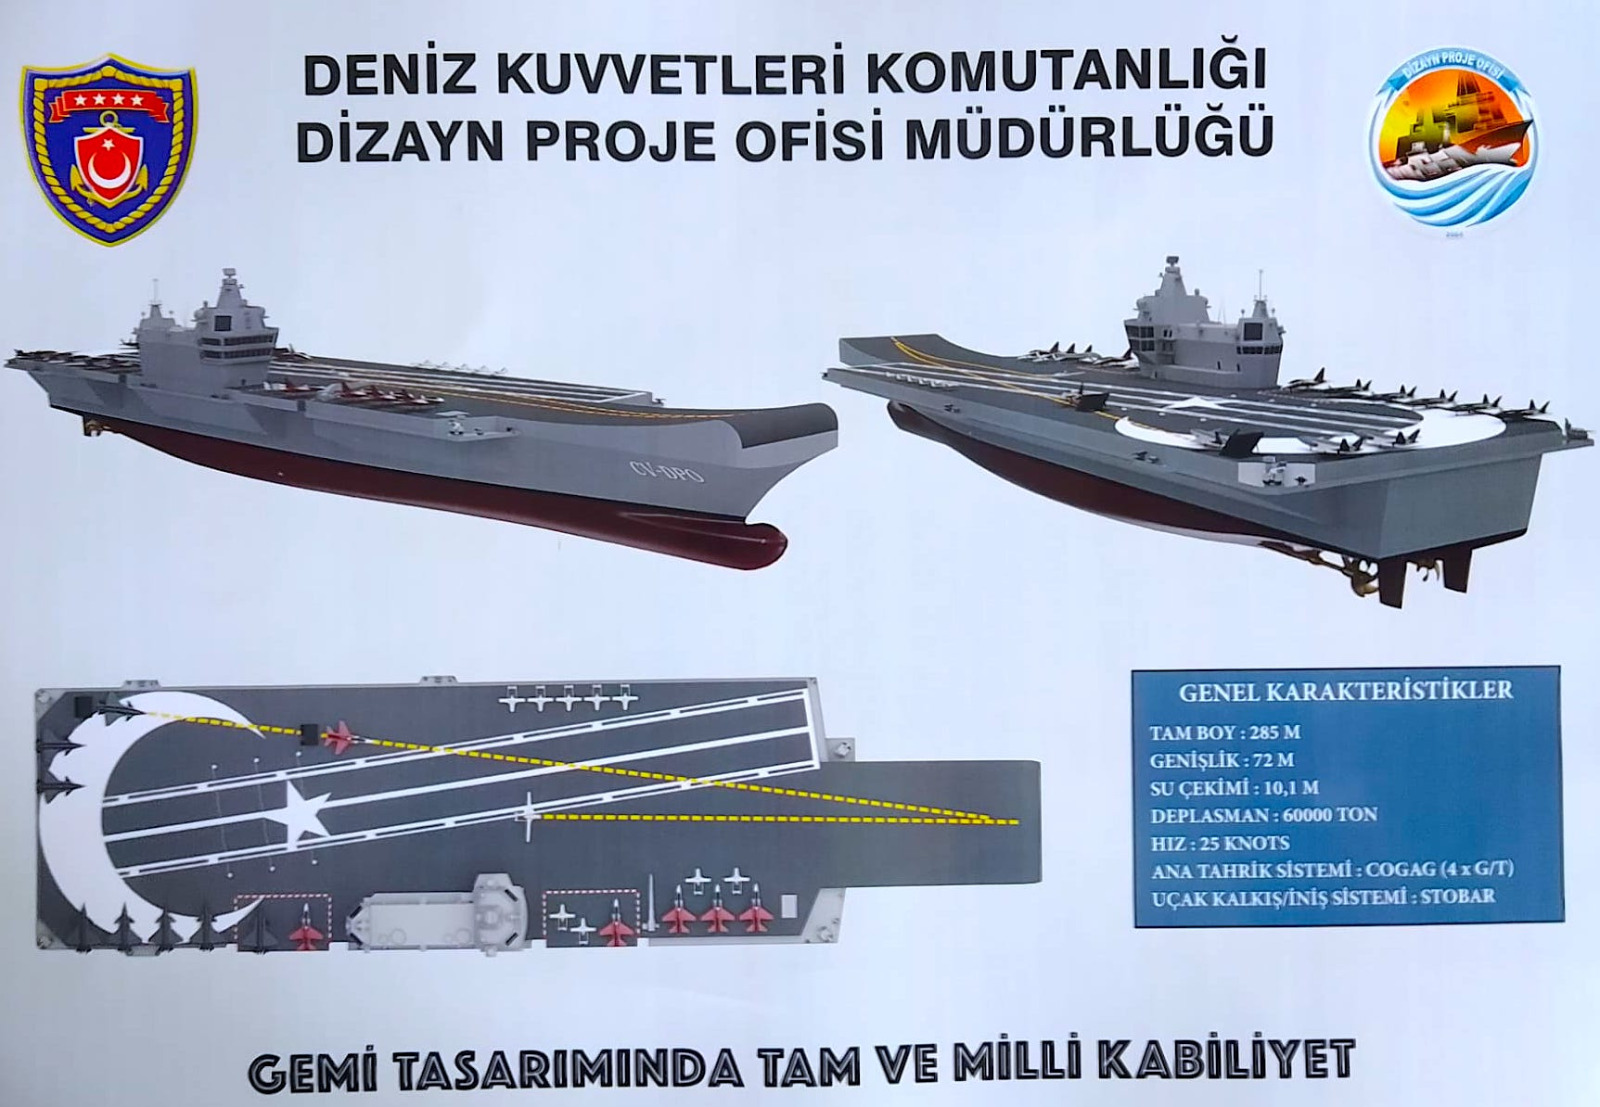 Türkiye launched an aircraft carrier weighing 60,000 tons, twice the size of the Anatolia!